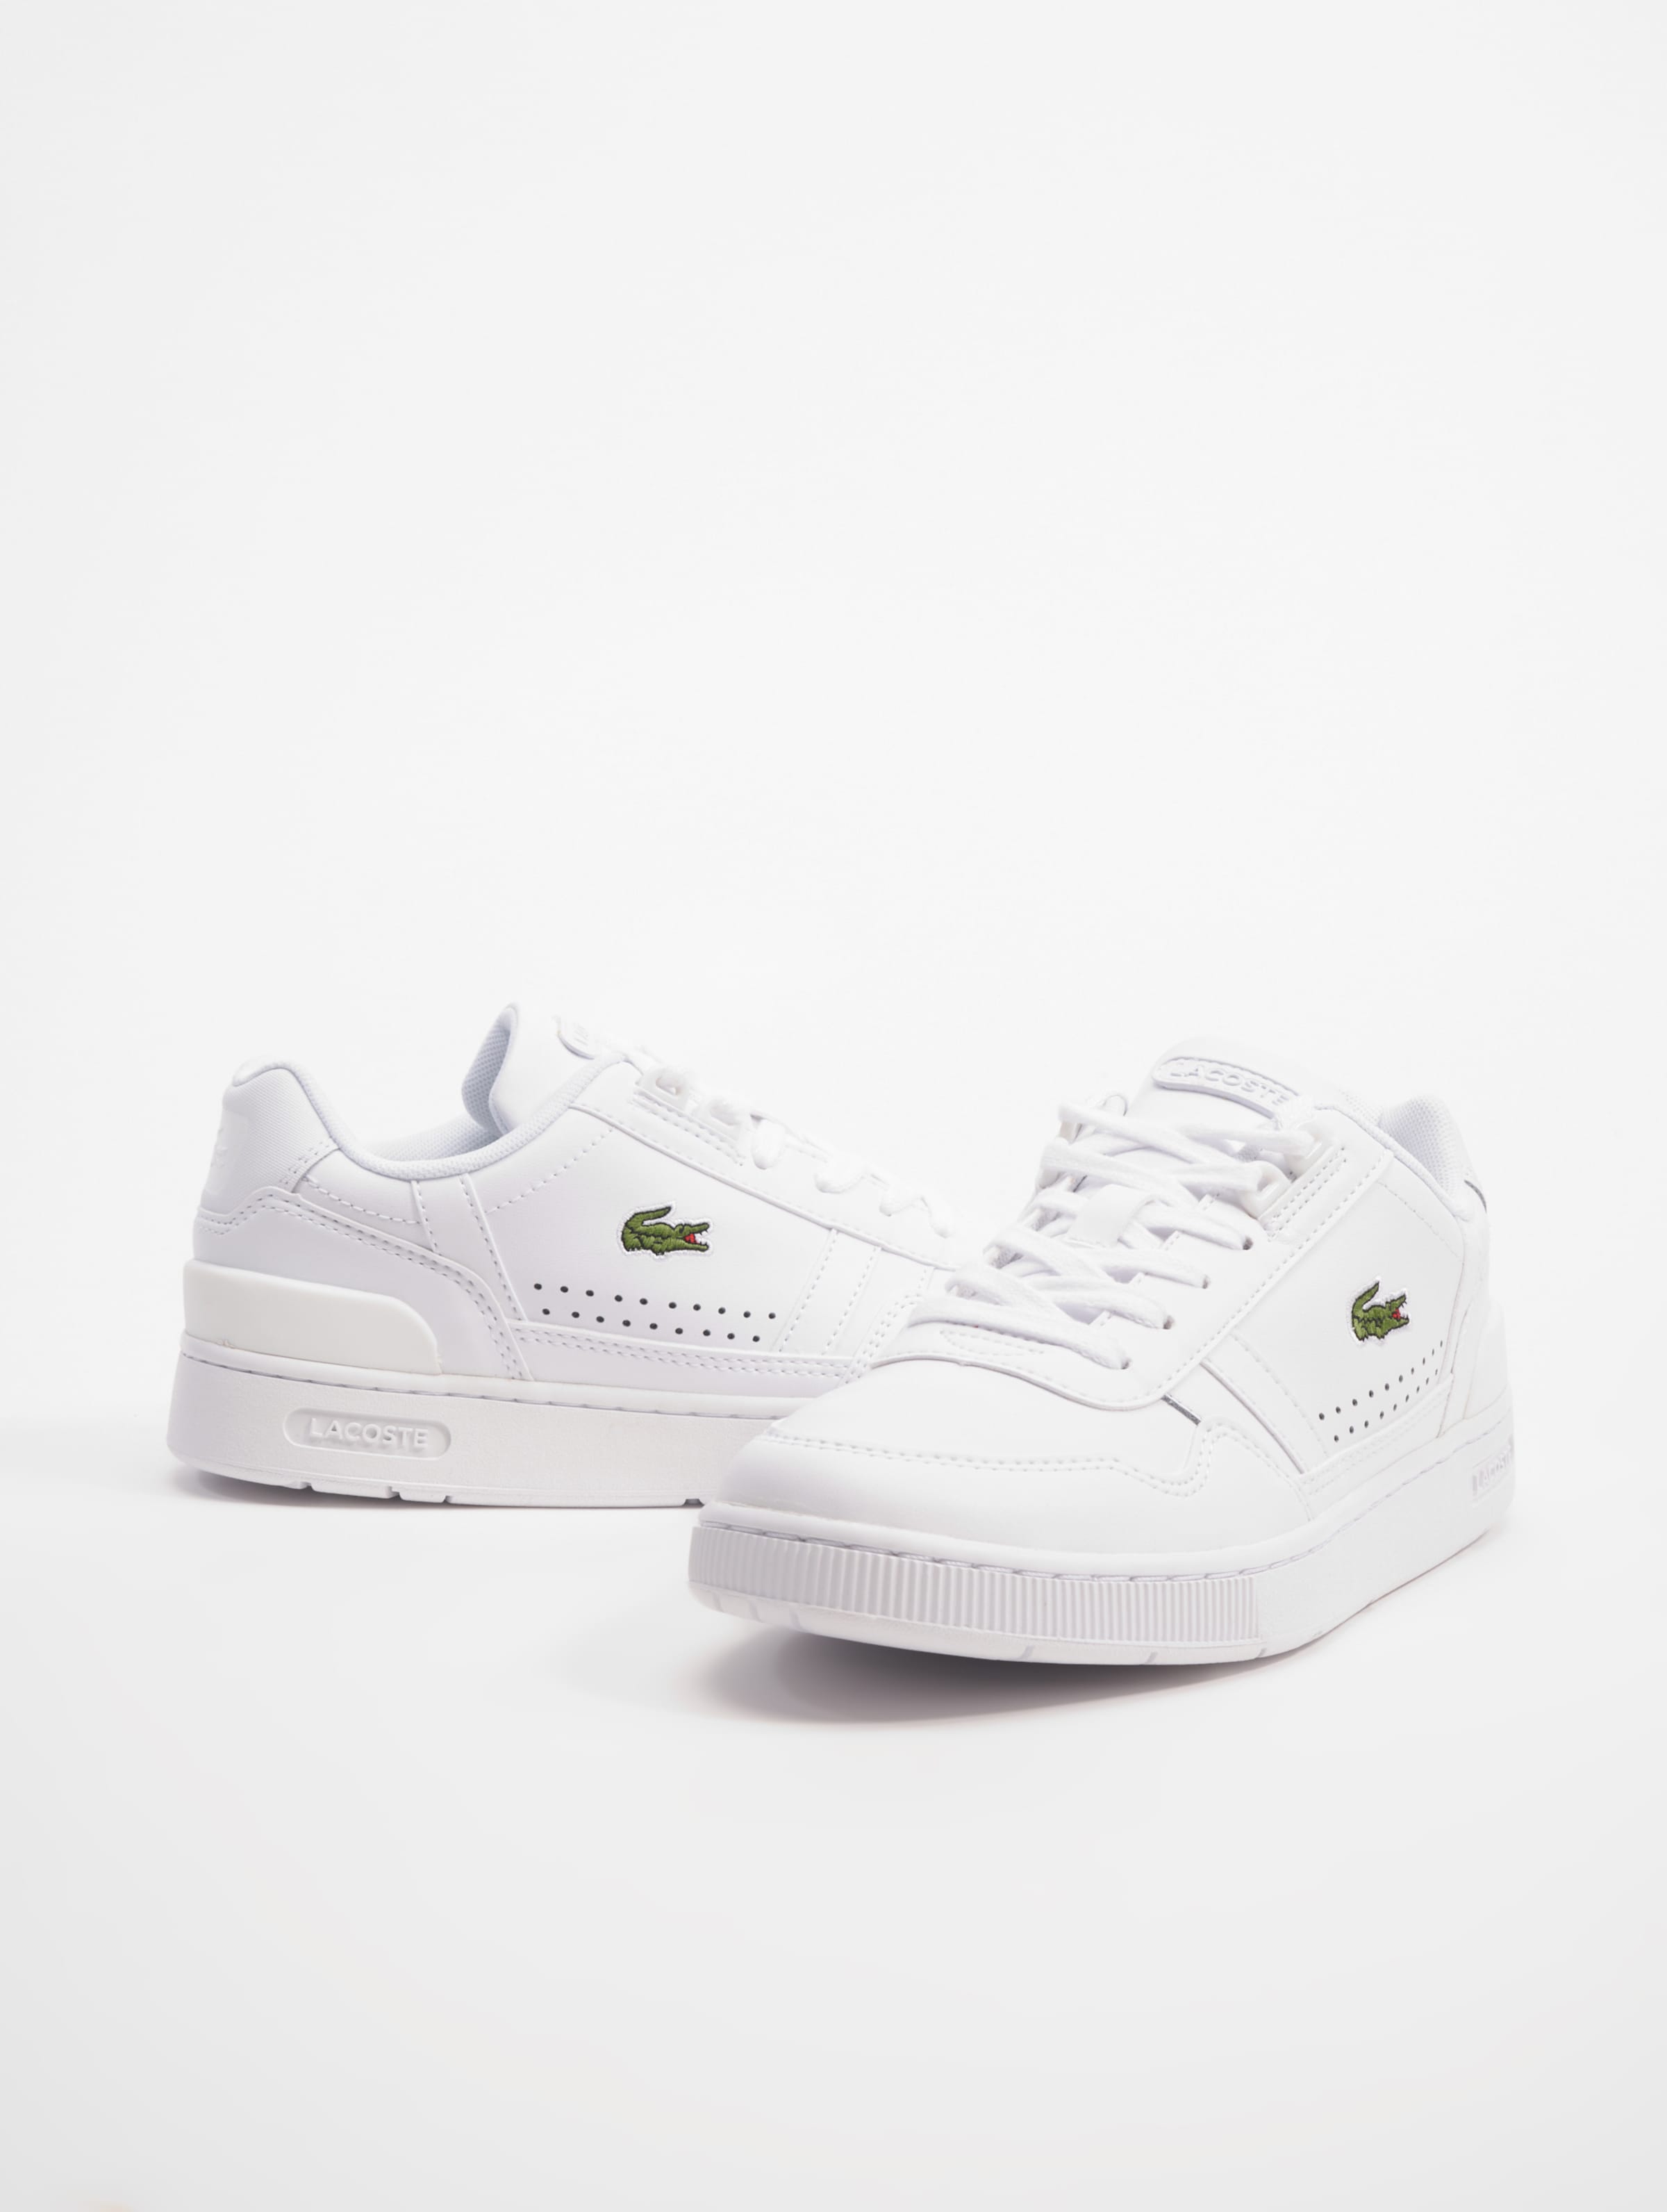 Lacoste T-Clip Dames Sneakers - Wit - Maat 39.5